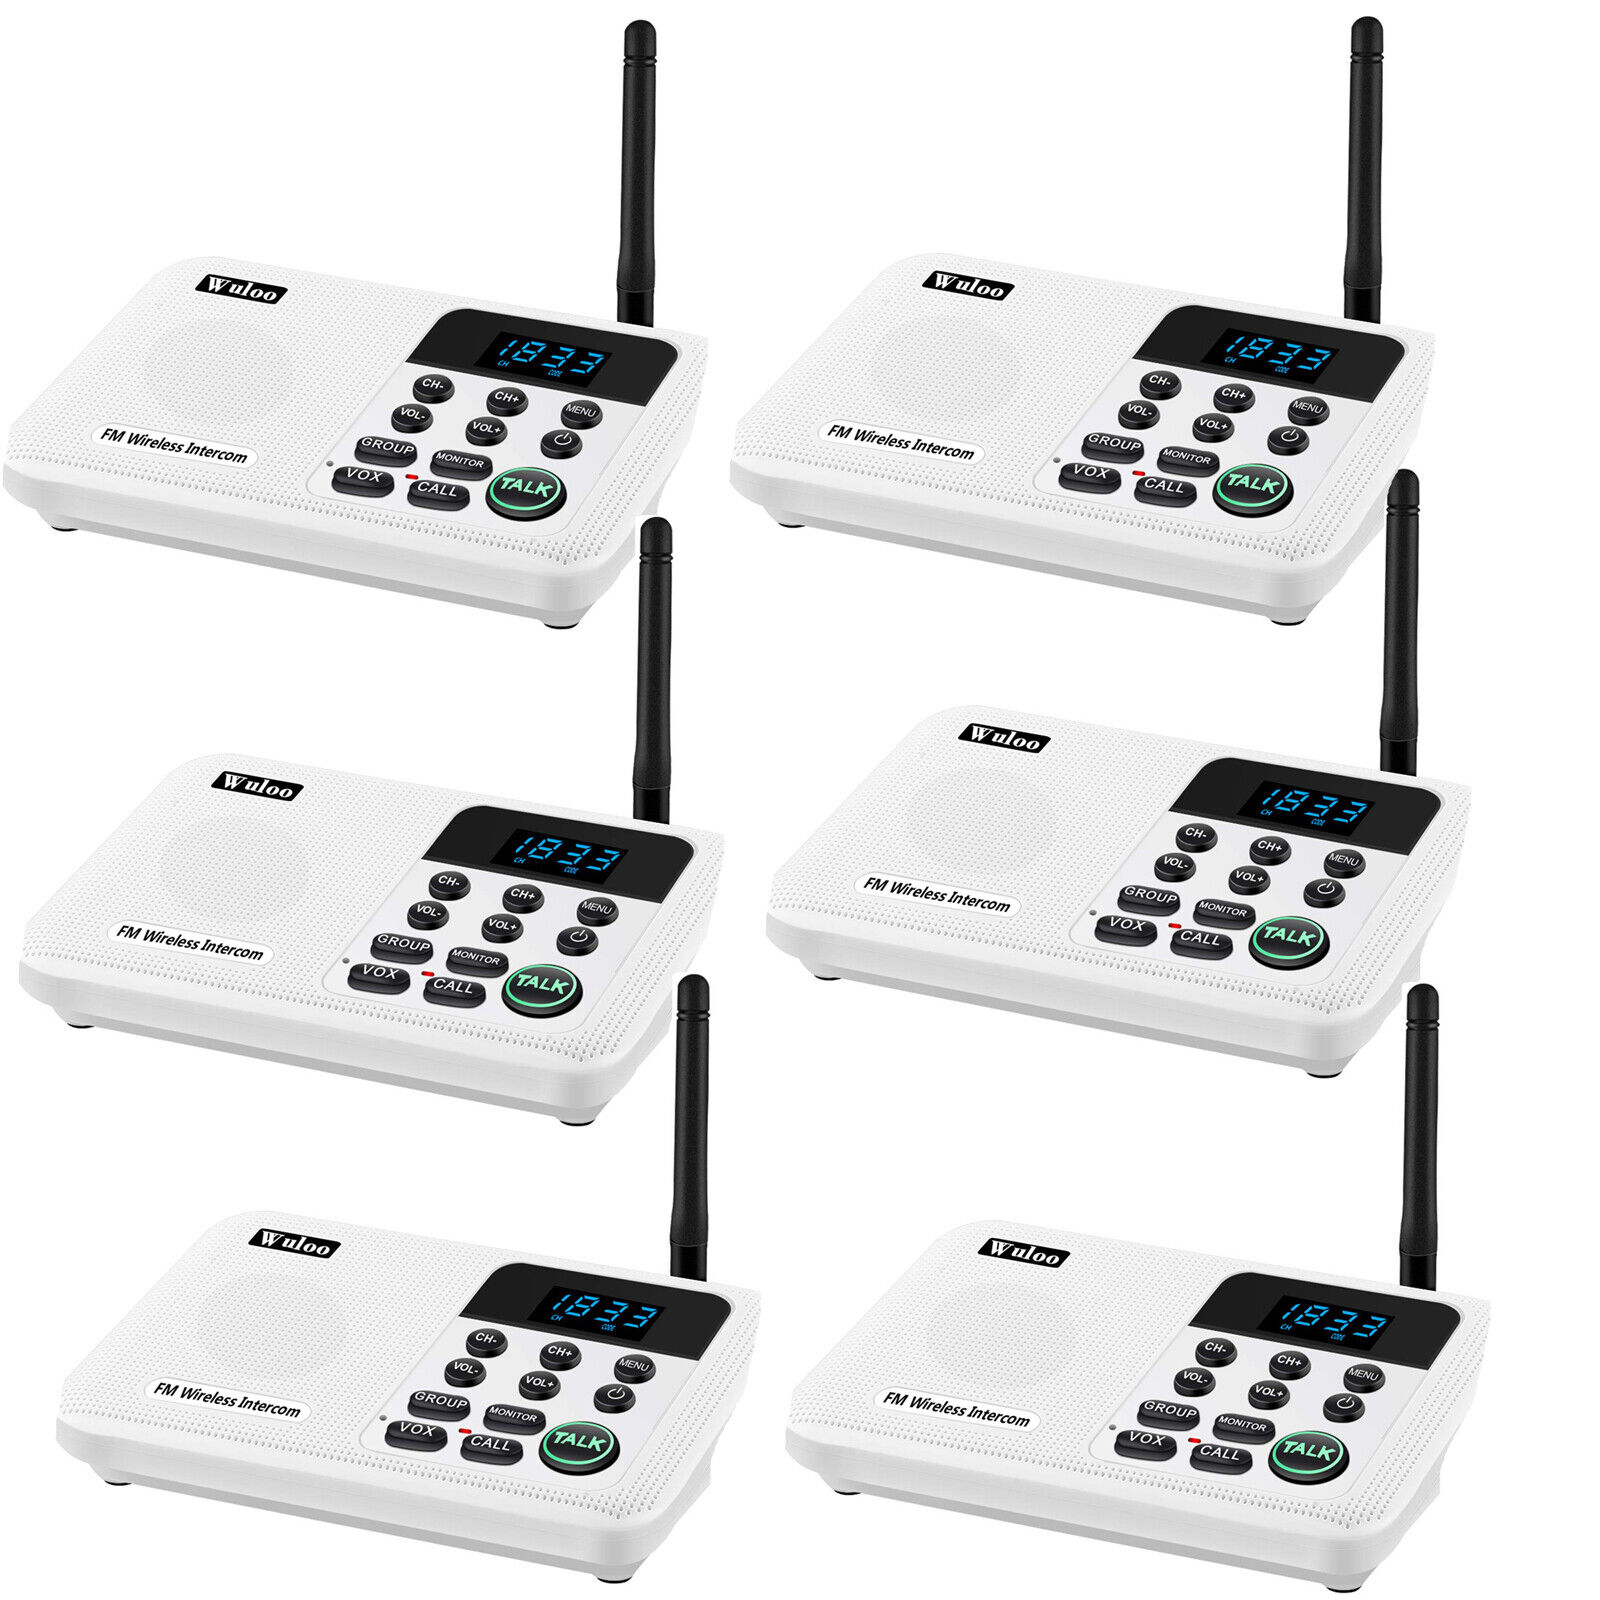 22-channel Fm Wireless Intercom System For Business Office Room&room Communicate